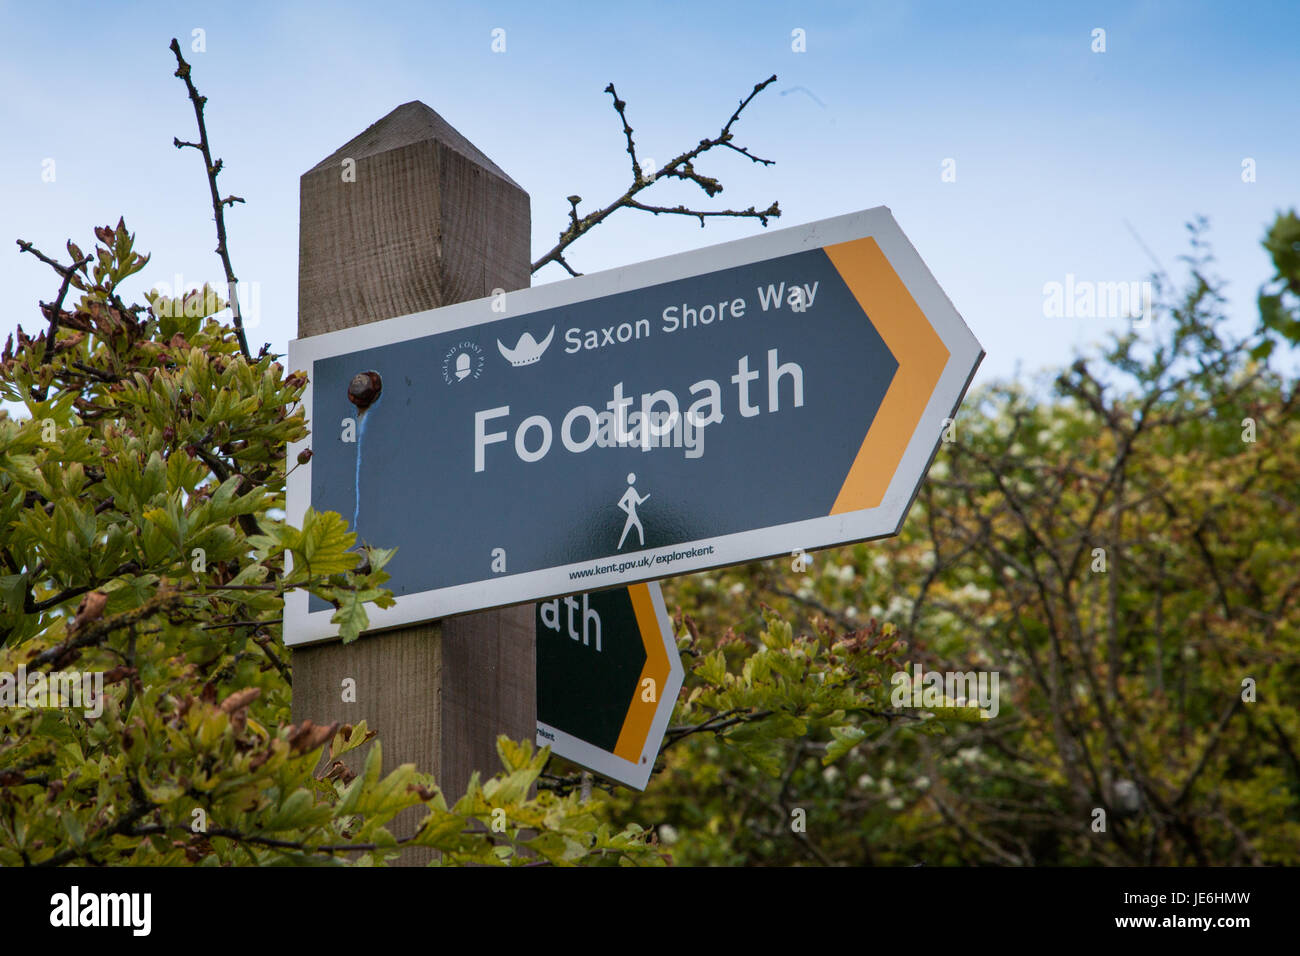 Saxon Shore Way Footpath Sign giving hiking directions. Stock Photo